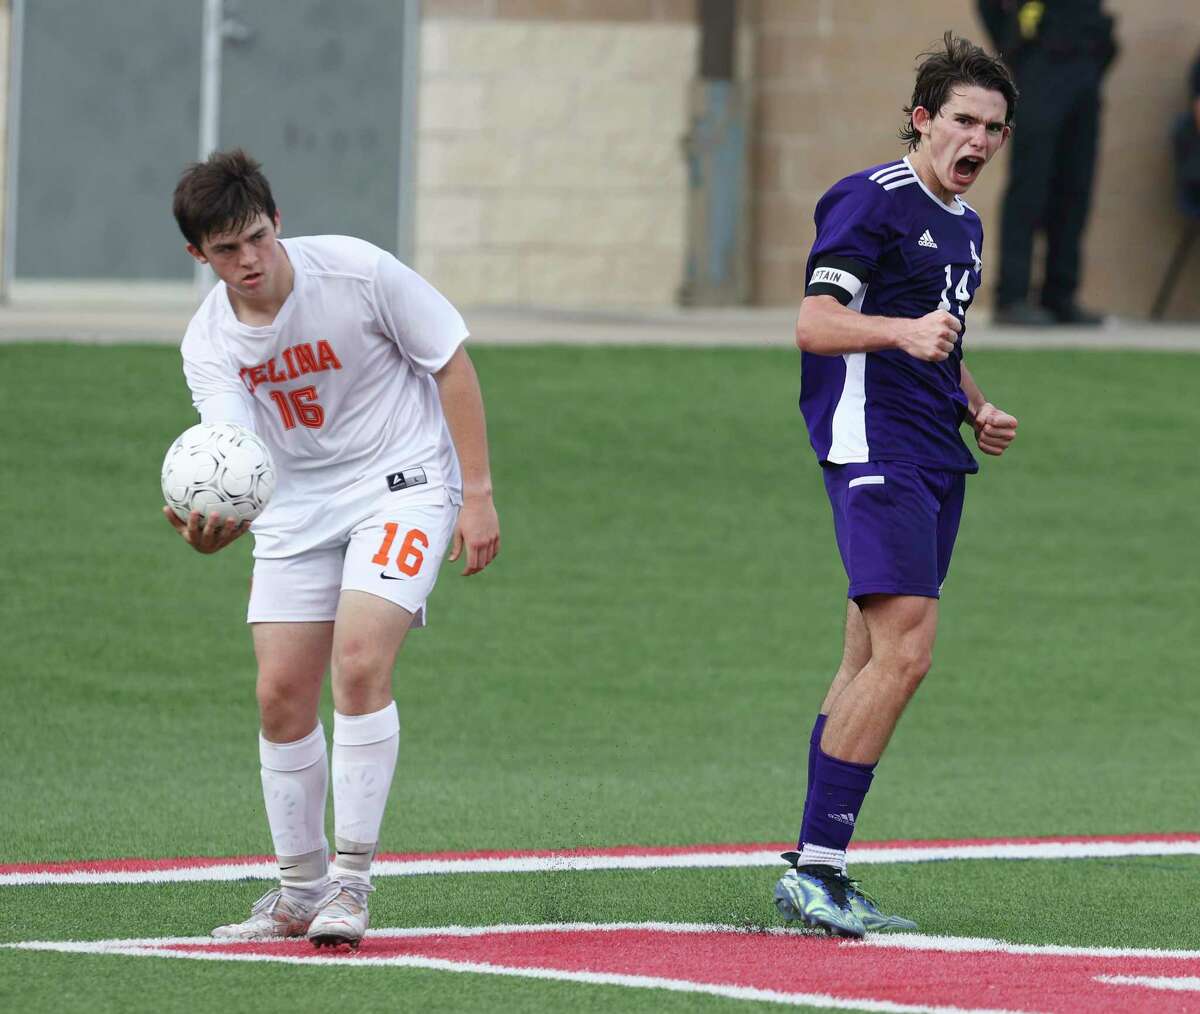 Boerne Greyhounds' Sam Theiss (14) reacts after Celina Bobcats' Nikolas Hamblin (16) gets called for a penalty which set up a penalty kick for Boerne in the first overtime in the Class 4A soccer state championship game in Georgetown on Friday, Apr. 15, 2022. Boerne scored on that penalty kick and helped Boerne defeat Celina, 2-1, in overtime to win their second and back-to-back state title.